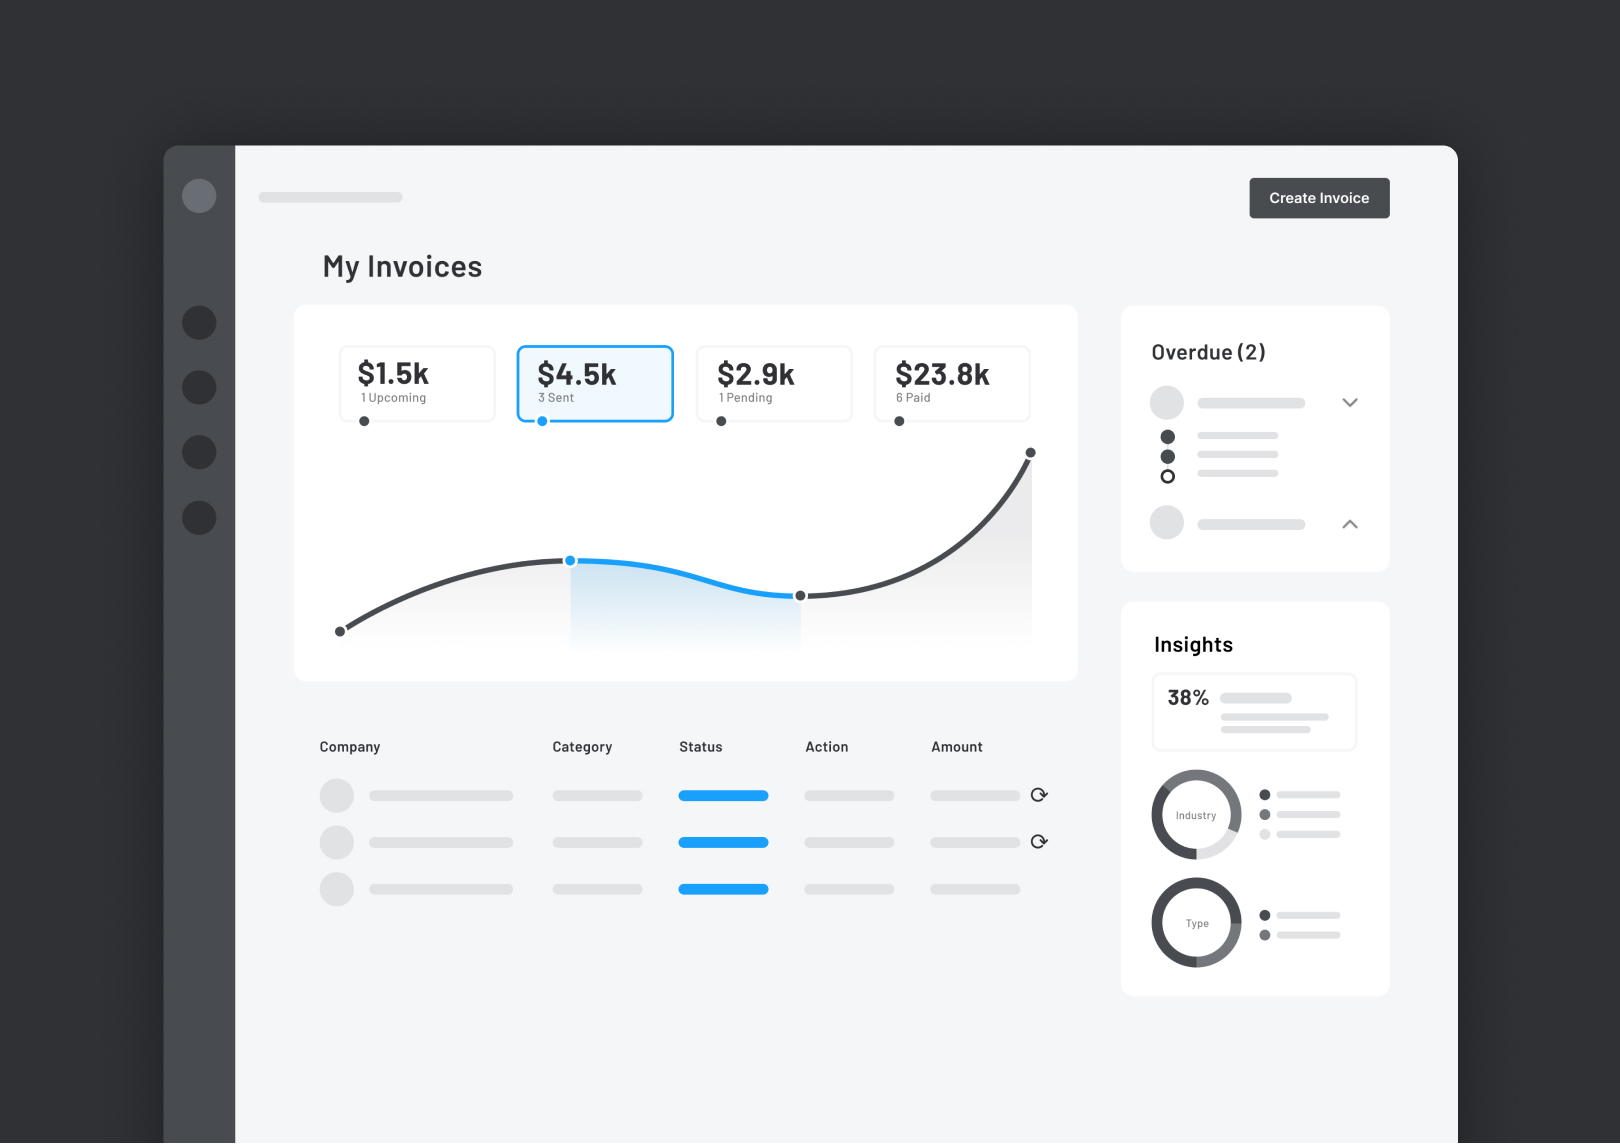 How to Design a Dashboard UI Prototype?